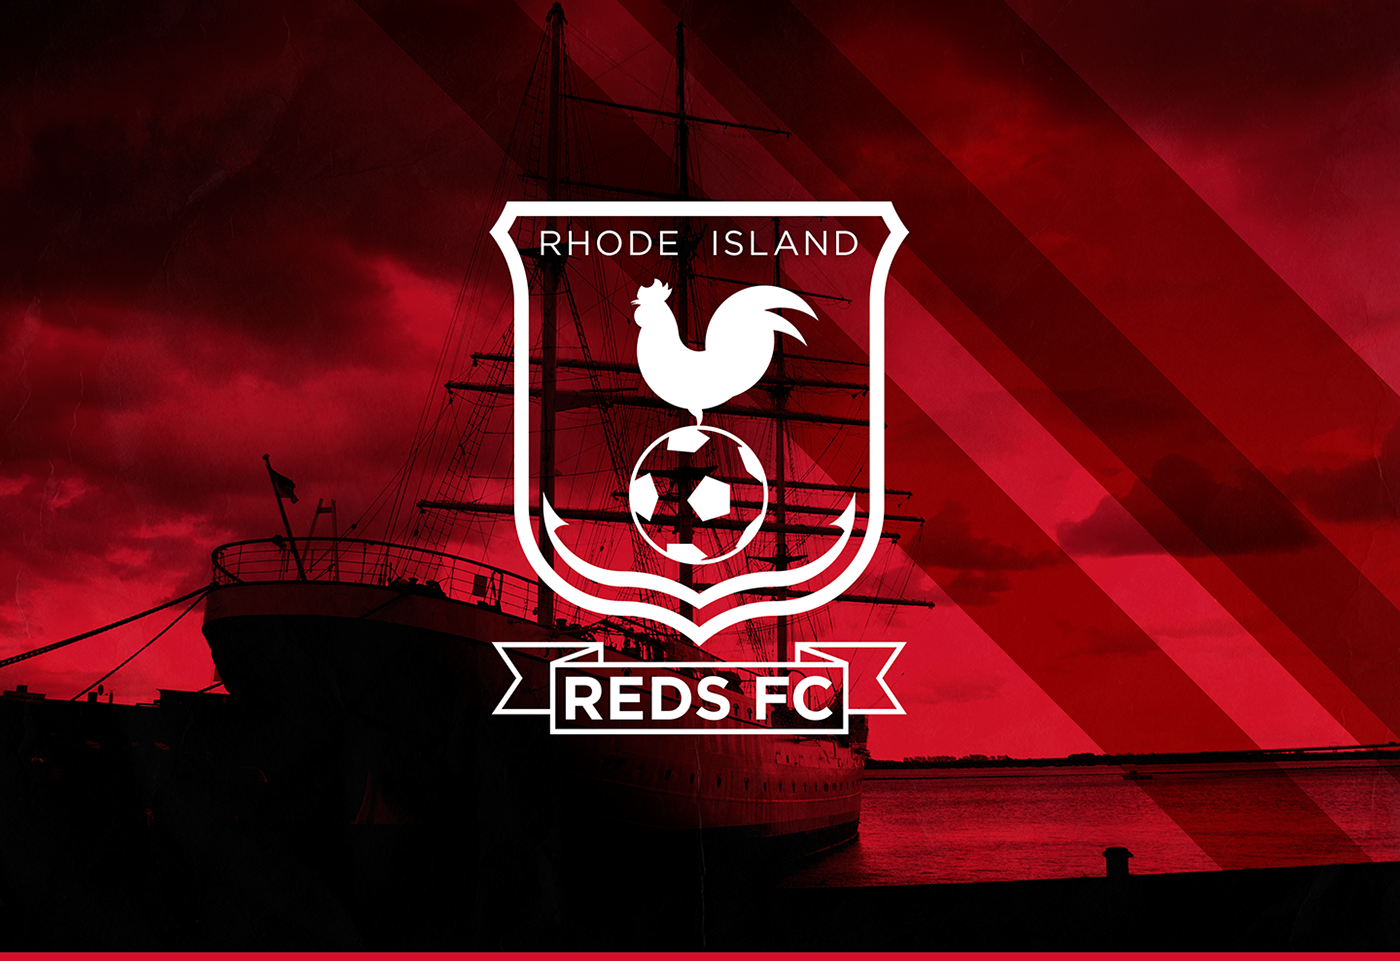 Rhode Island RI Rhode Island Reds Rhode Island RedsFC Reds FC football soccer kit uniform Rooster red anchor Providence Cranston crest